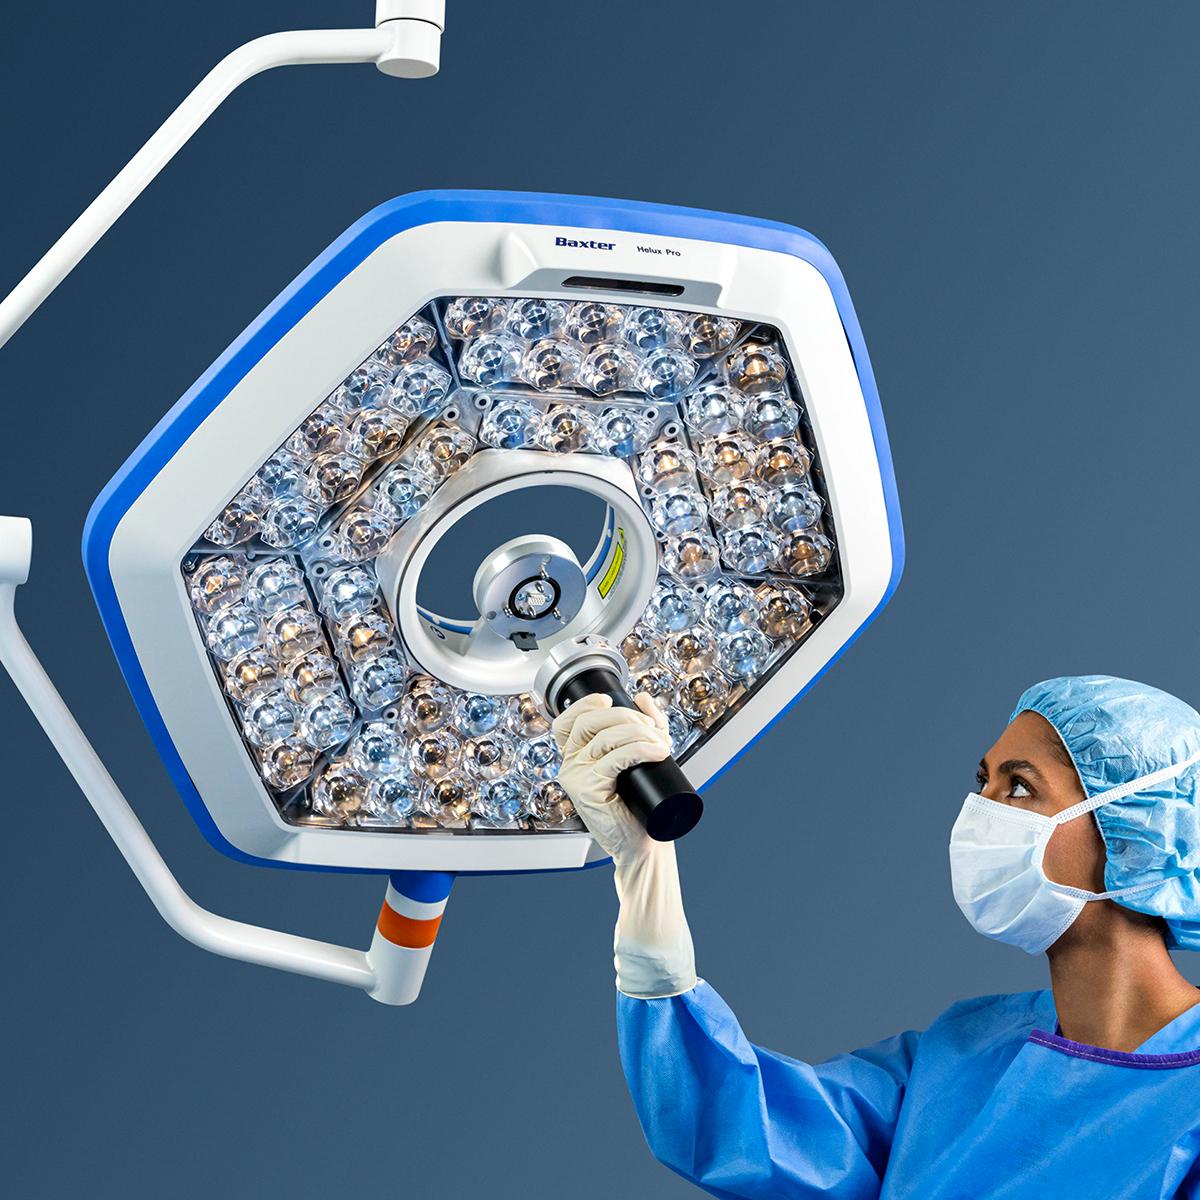 Clinician attaches camera to Helux Pro surgical light